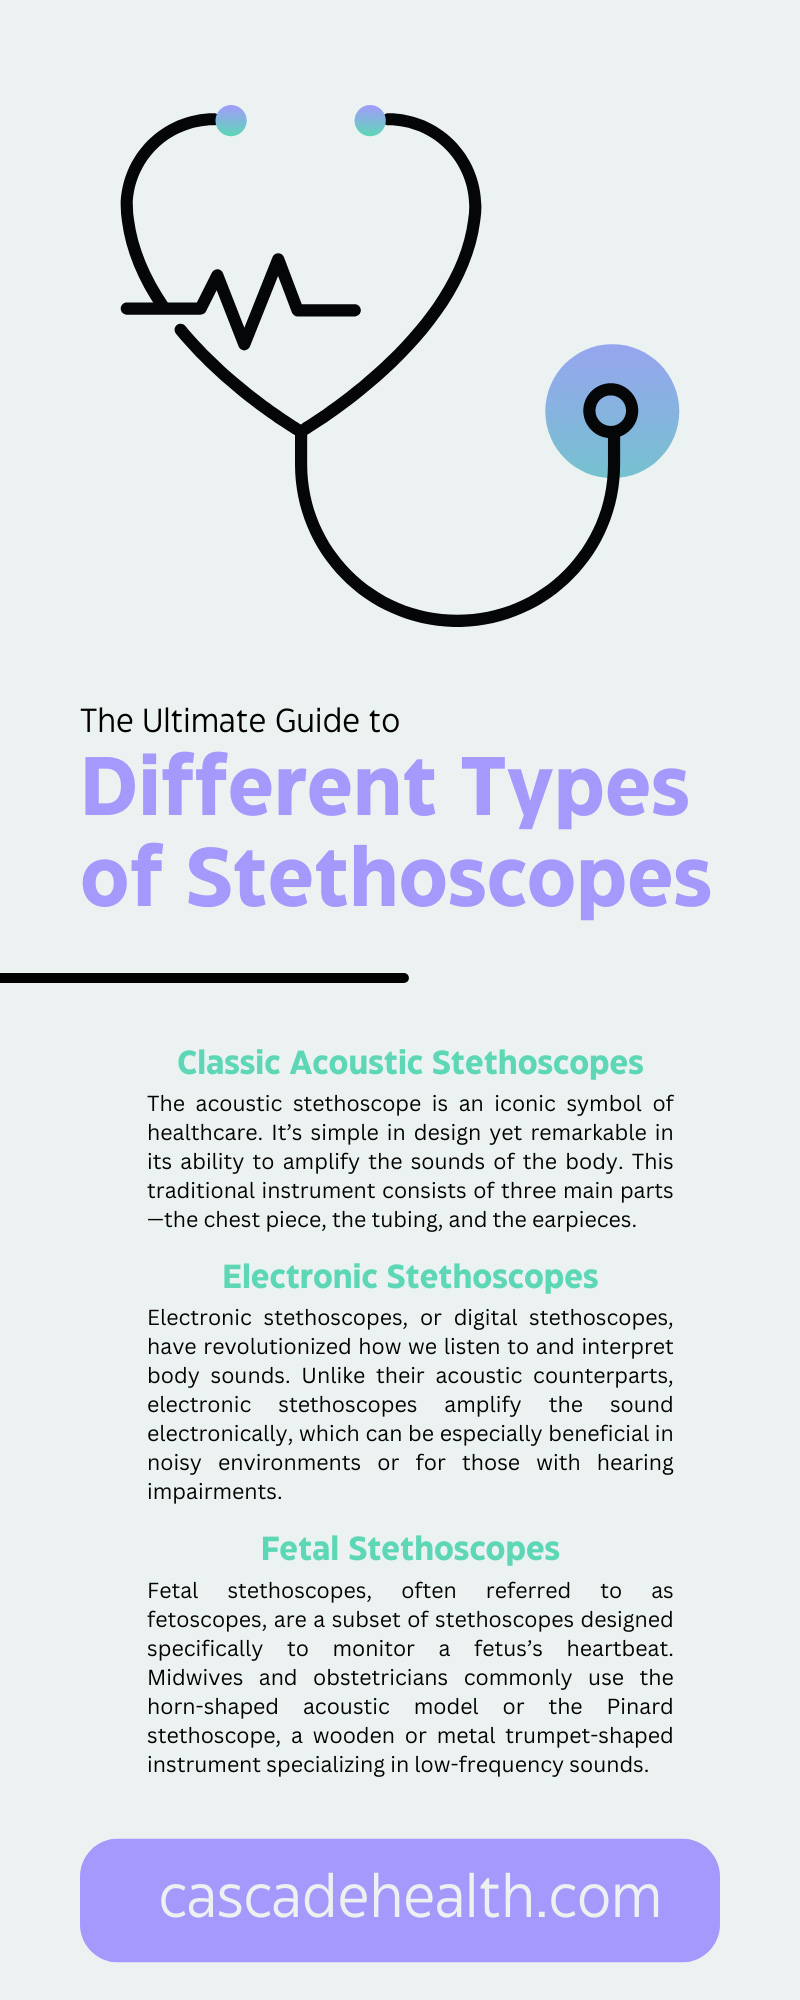 The Ultimate Guide to Different Types of Stethoscopes